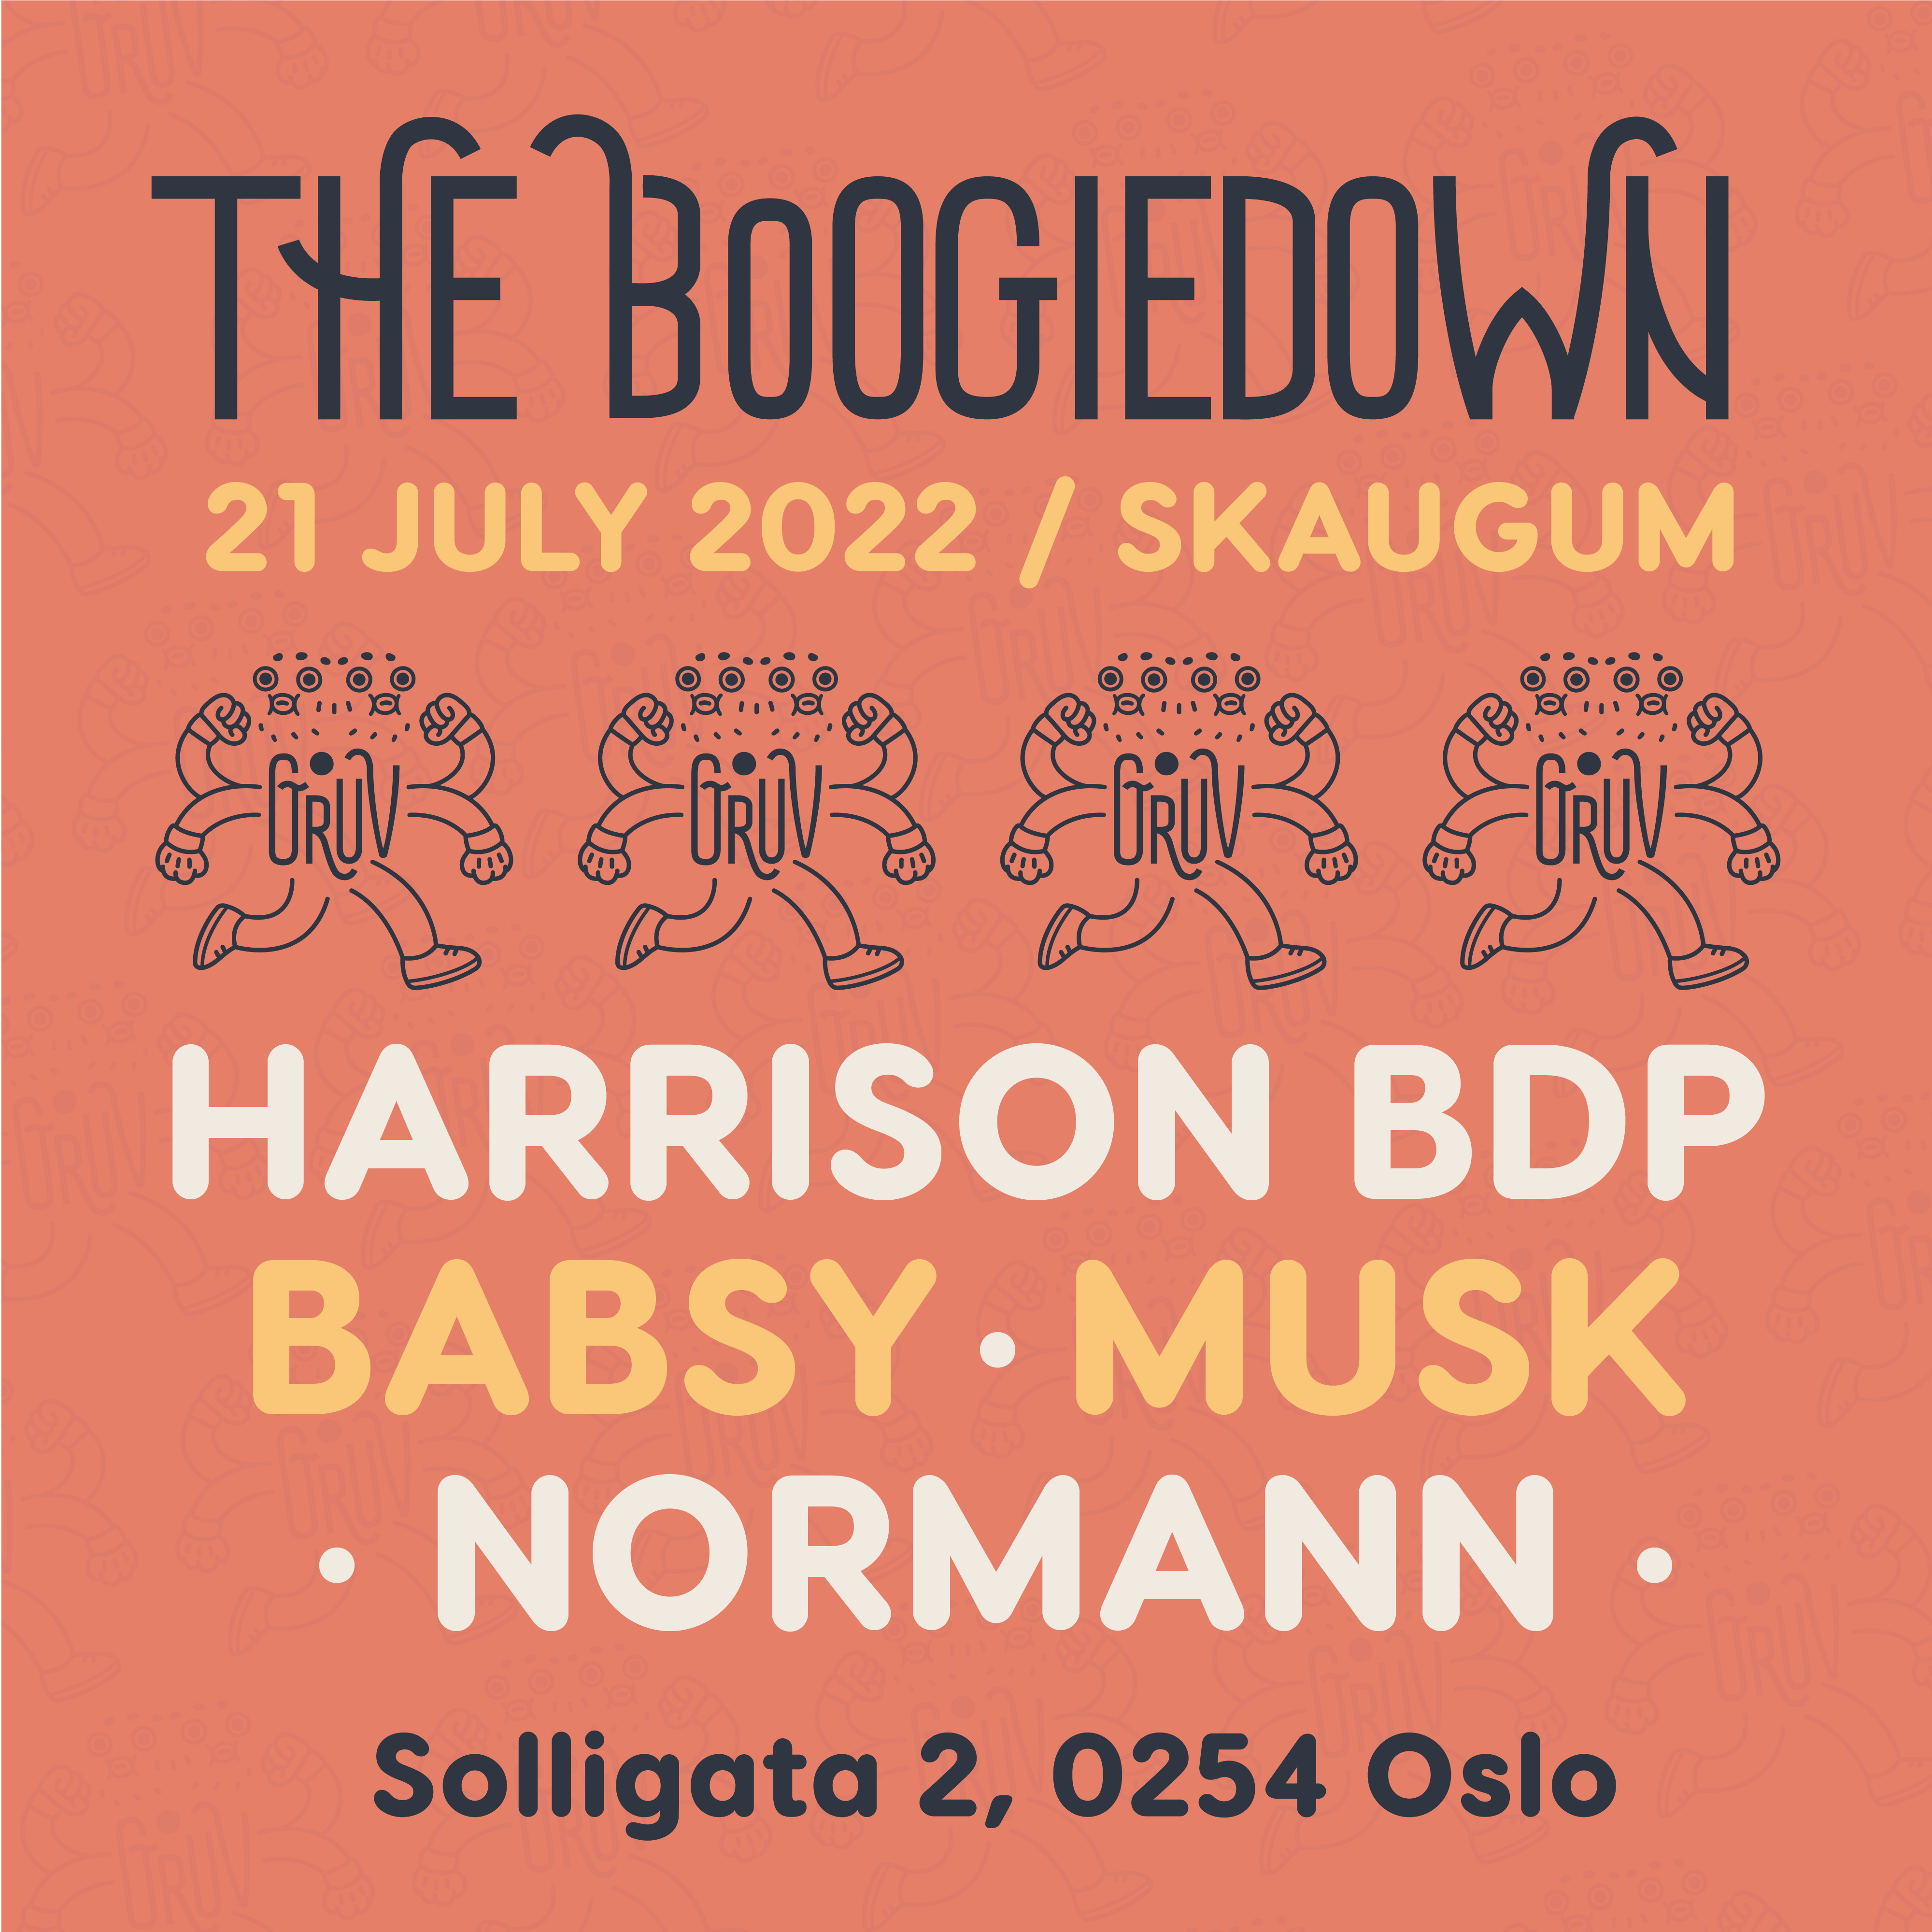 Gruv: The Boogiedown at Skaugum with Harrison BDP, Babsy, Musk, Normann - フライヤー表